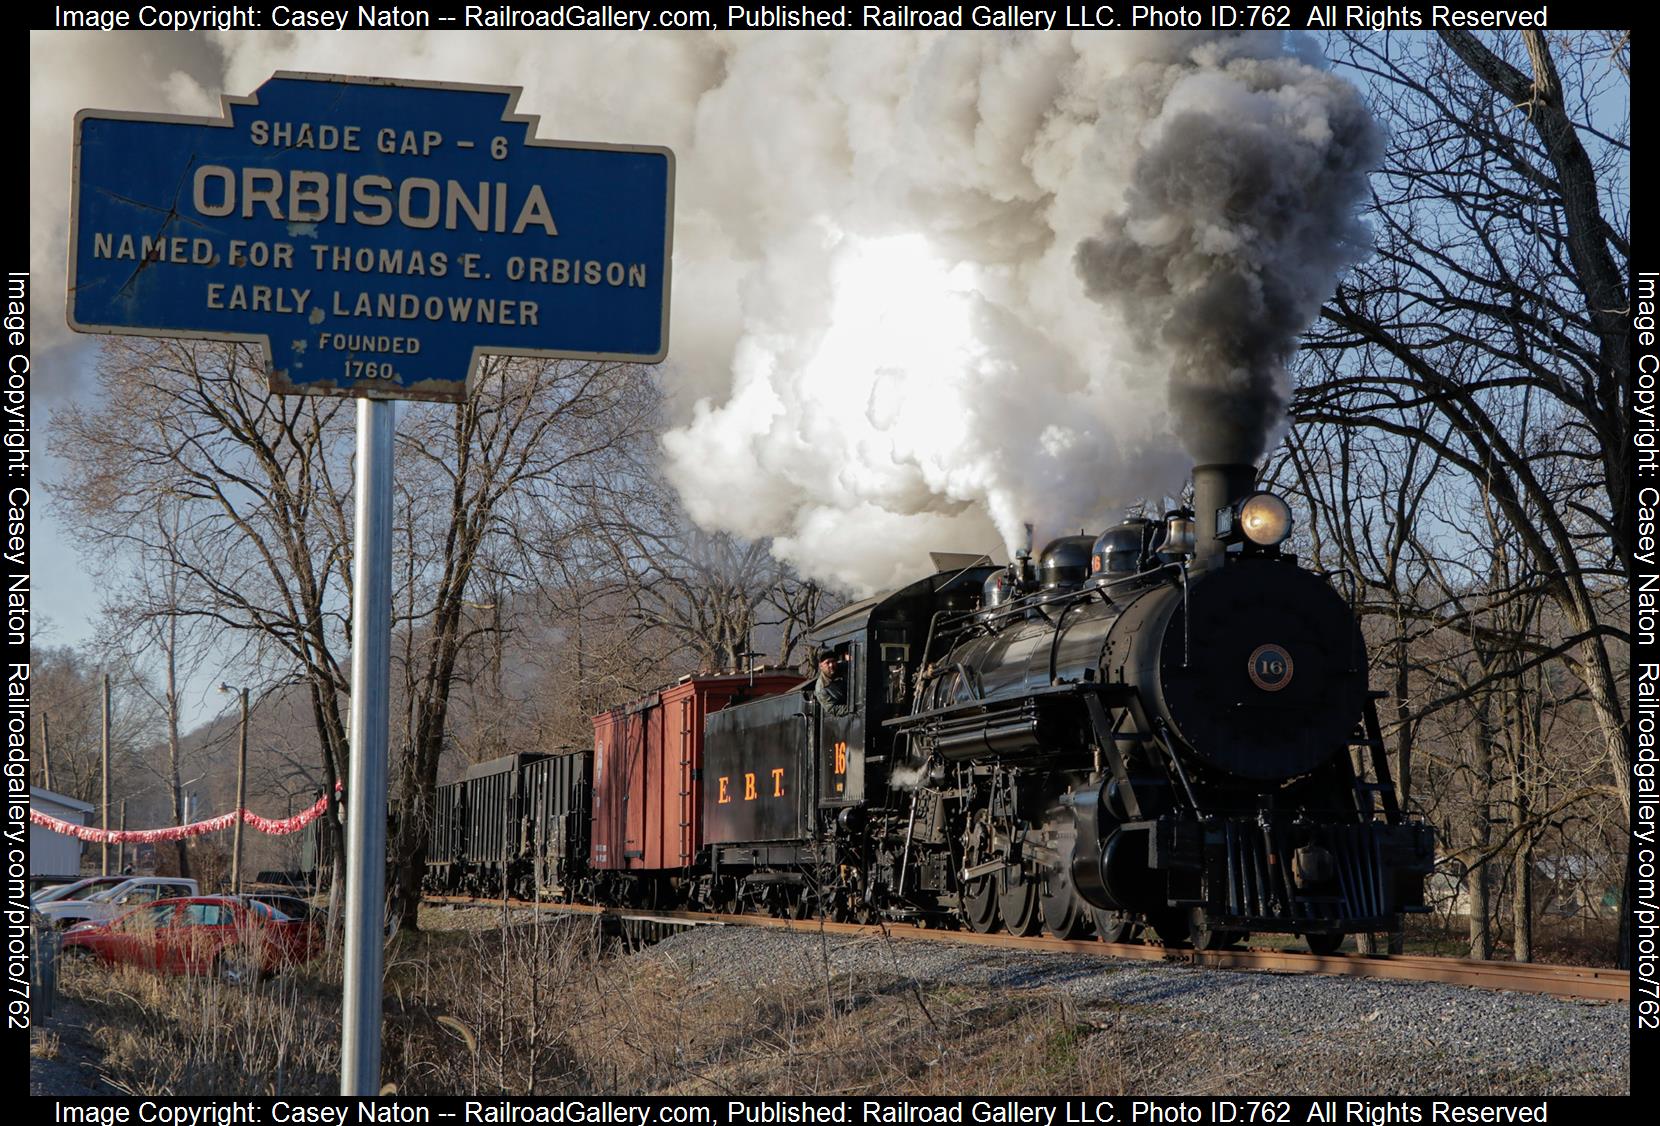 EBT 16 is a class 2-8-2 and  is pictured in Orbisonia, Pennsylvania, United States.  This was taken along the East Broad Top on the East Broad Top. Photo Copyright: Casey Naton uploaded to Railroad Gallery on 02/26/2023. This photograph of EBT 16 was taken on Saturday, February 18, 2023. All Rights Reserved. 